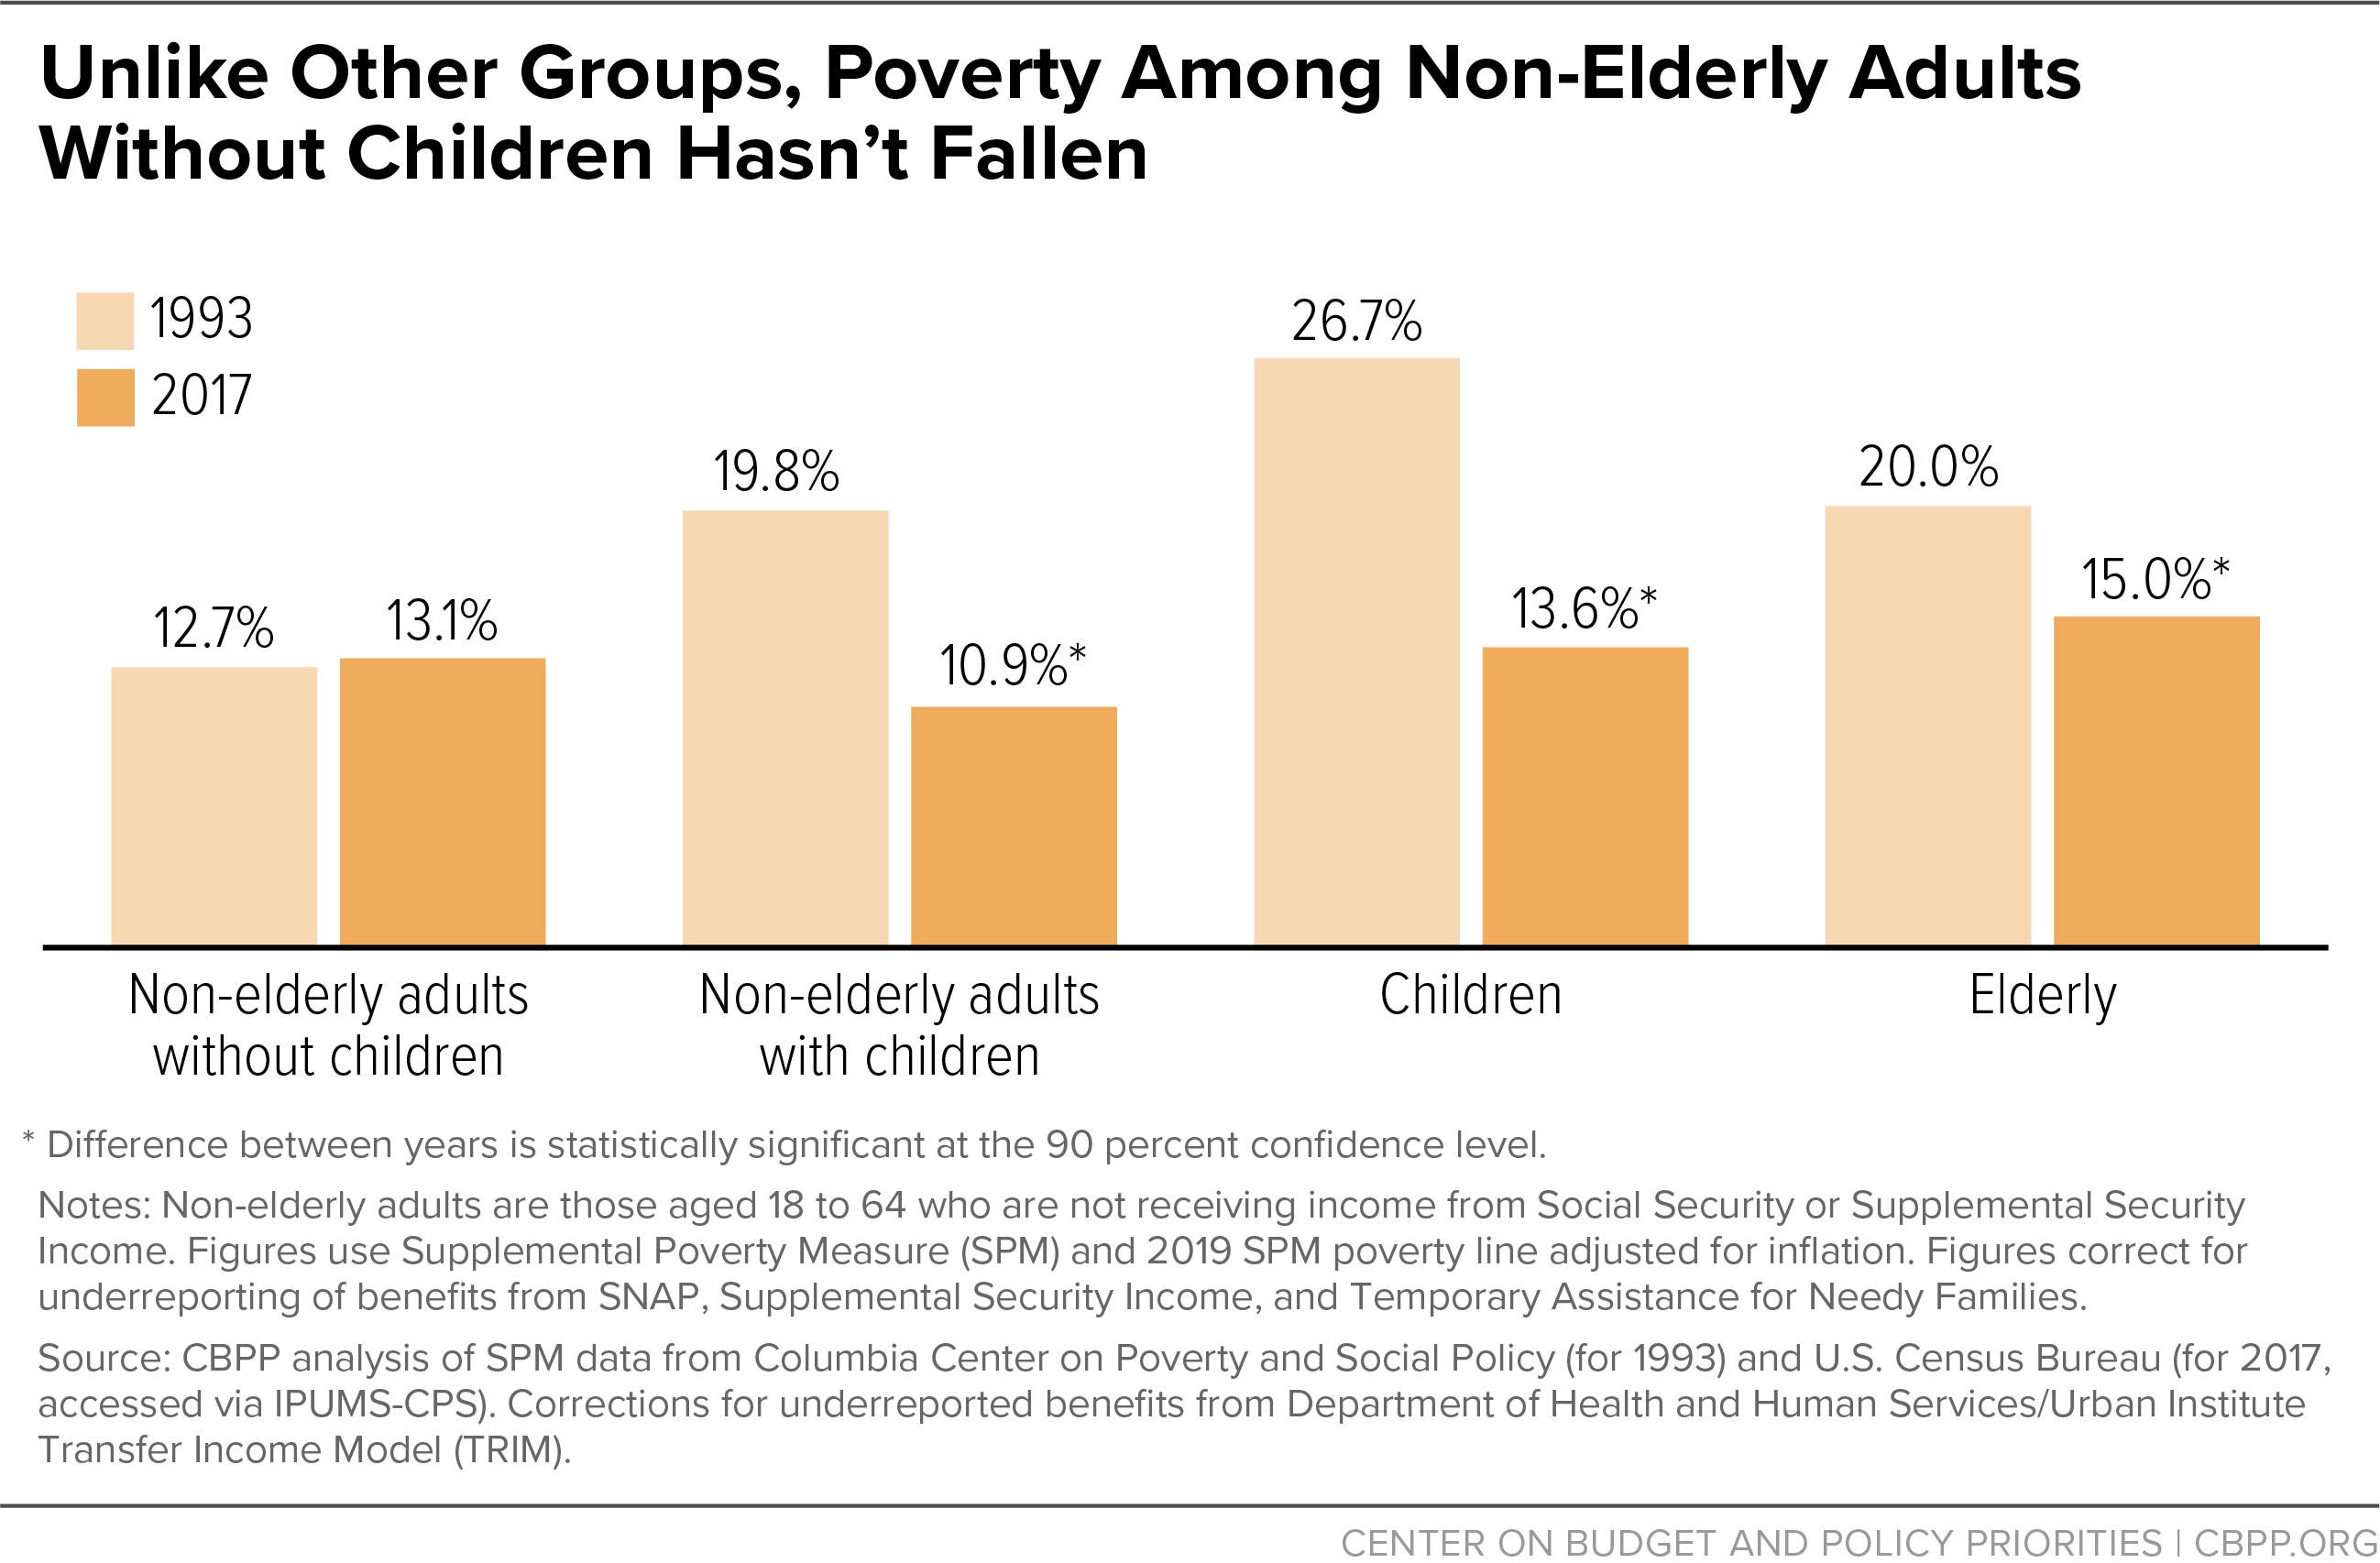 Unlike Other Groups, Poverty Among Non-Elderly Adults Without Children Hasn't Fallen